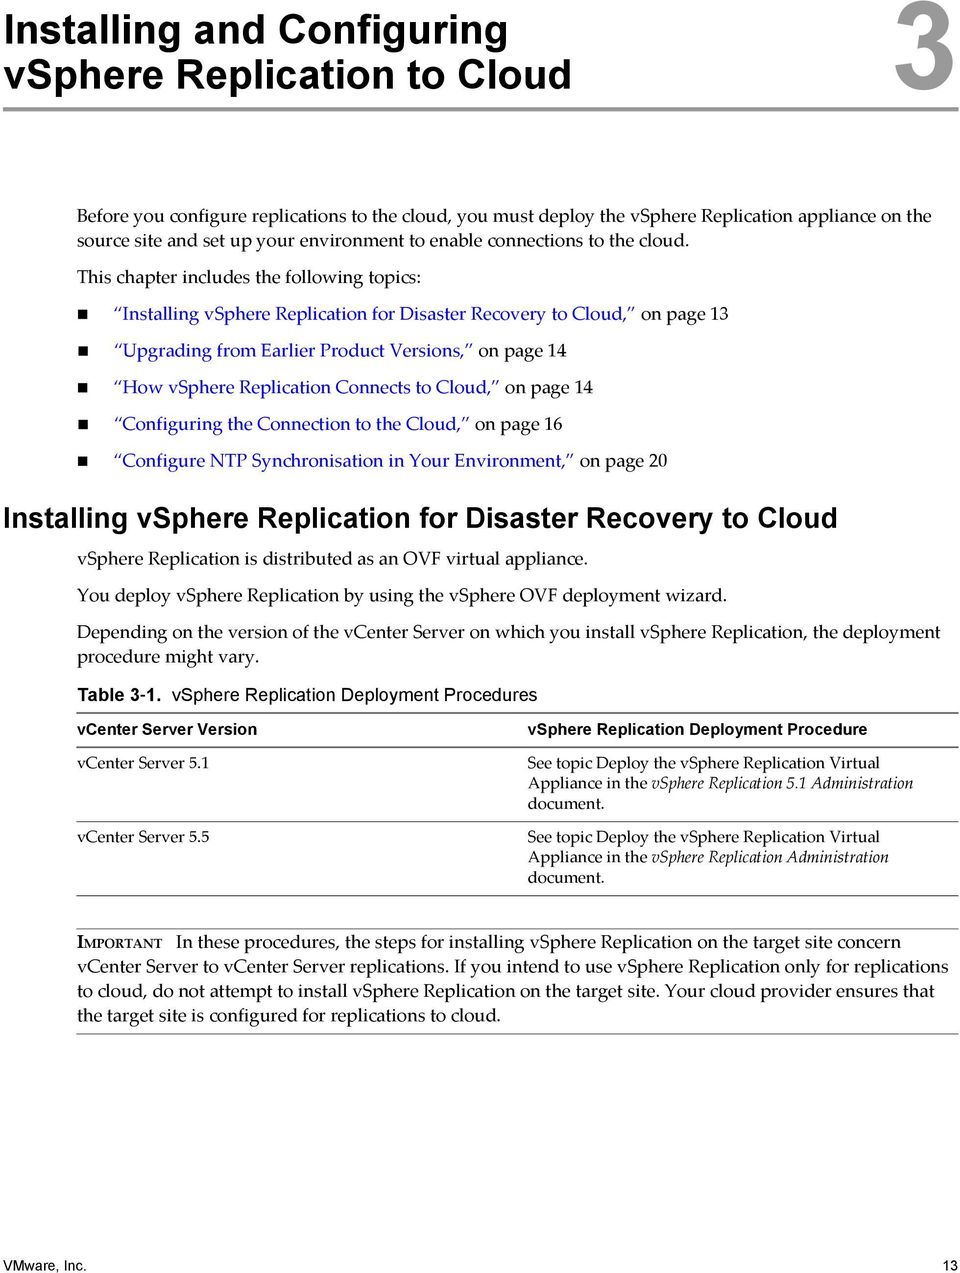 This chapter includes the following topics: Installing vsphere Replication for Disaster Recovery to Cloud, on page 13 Upgrading from Earlier Product Versions, on page 14 How vsphere Replication